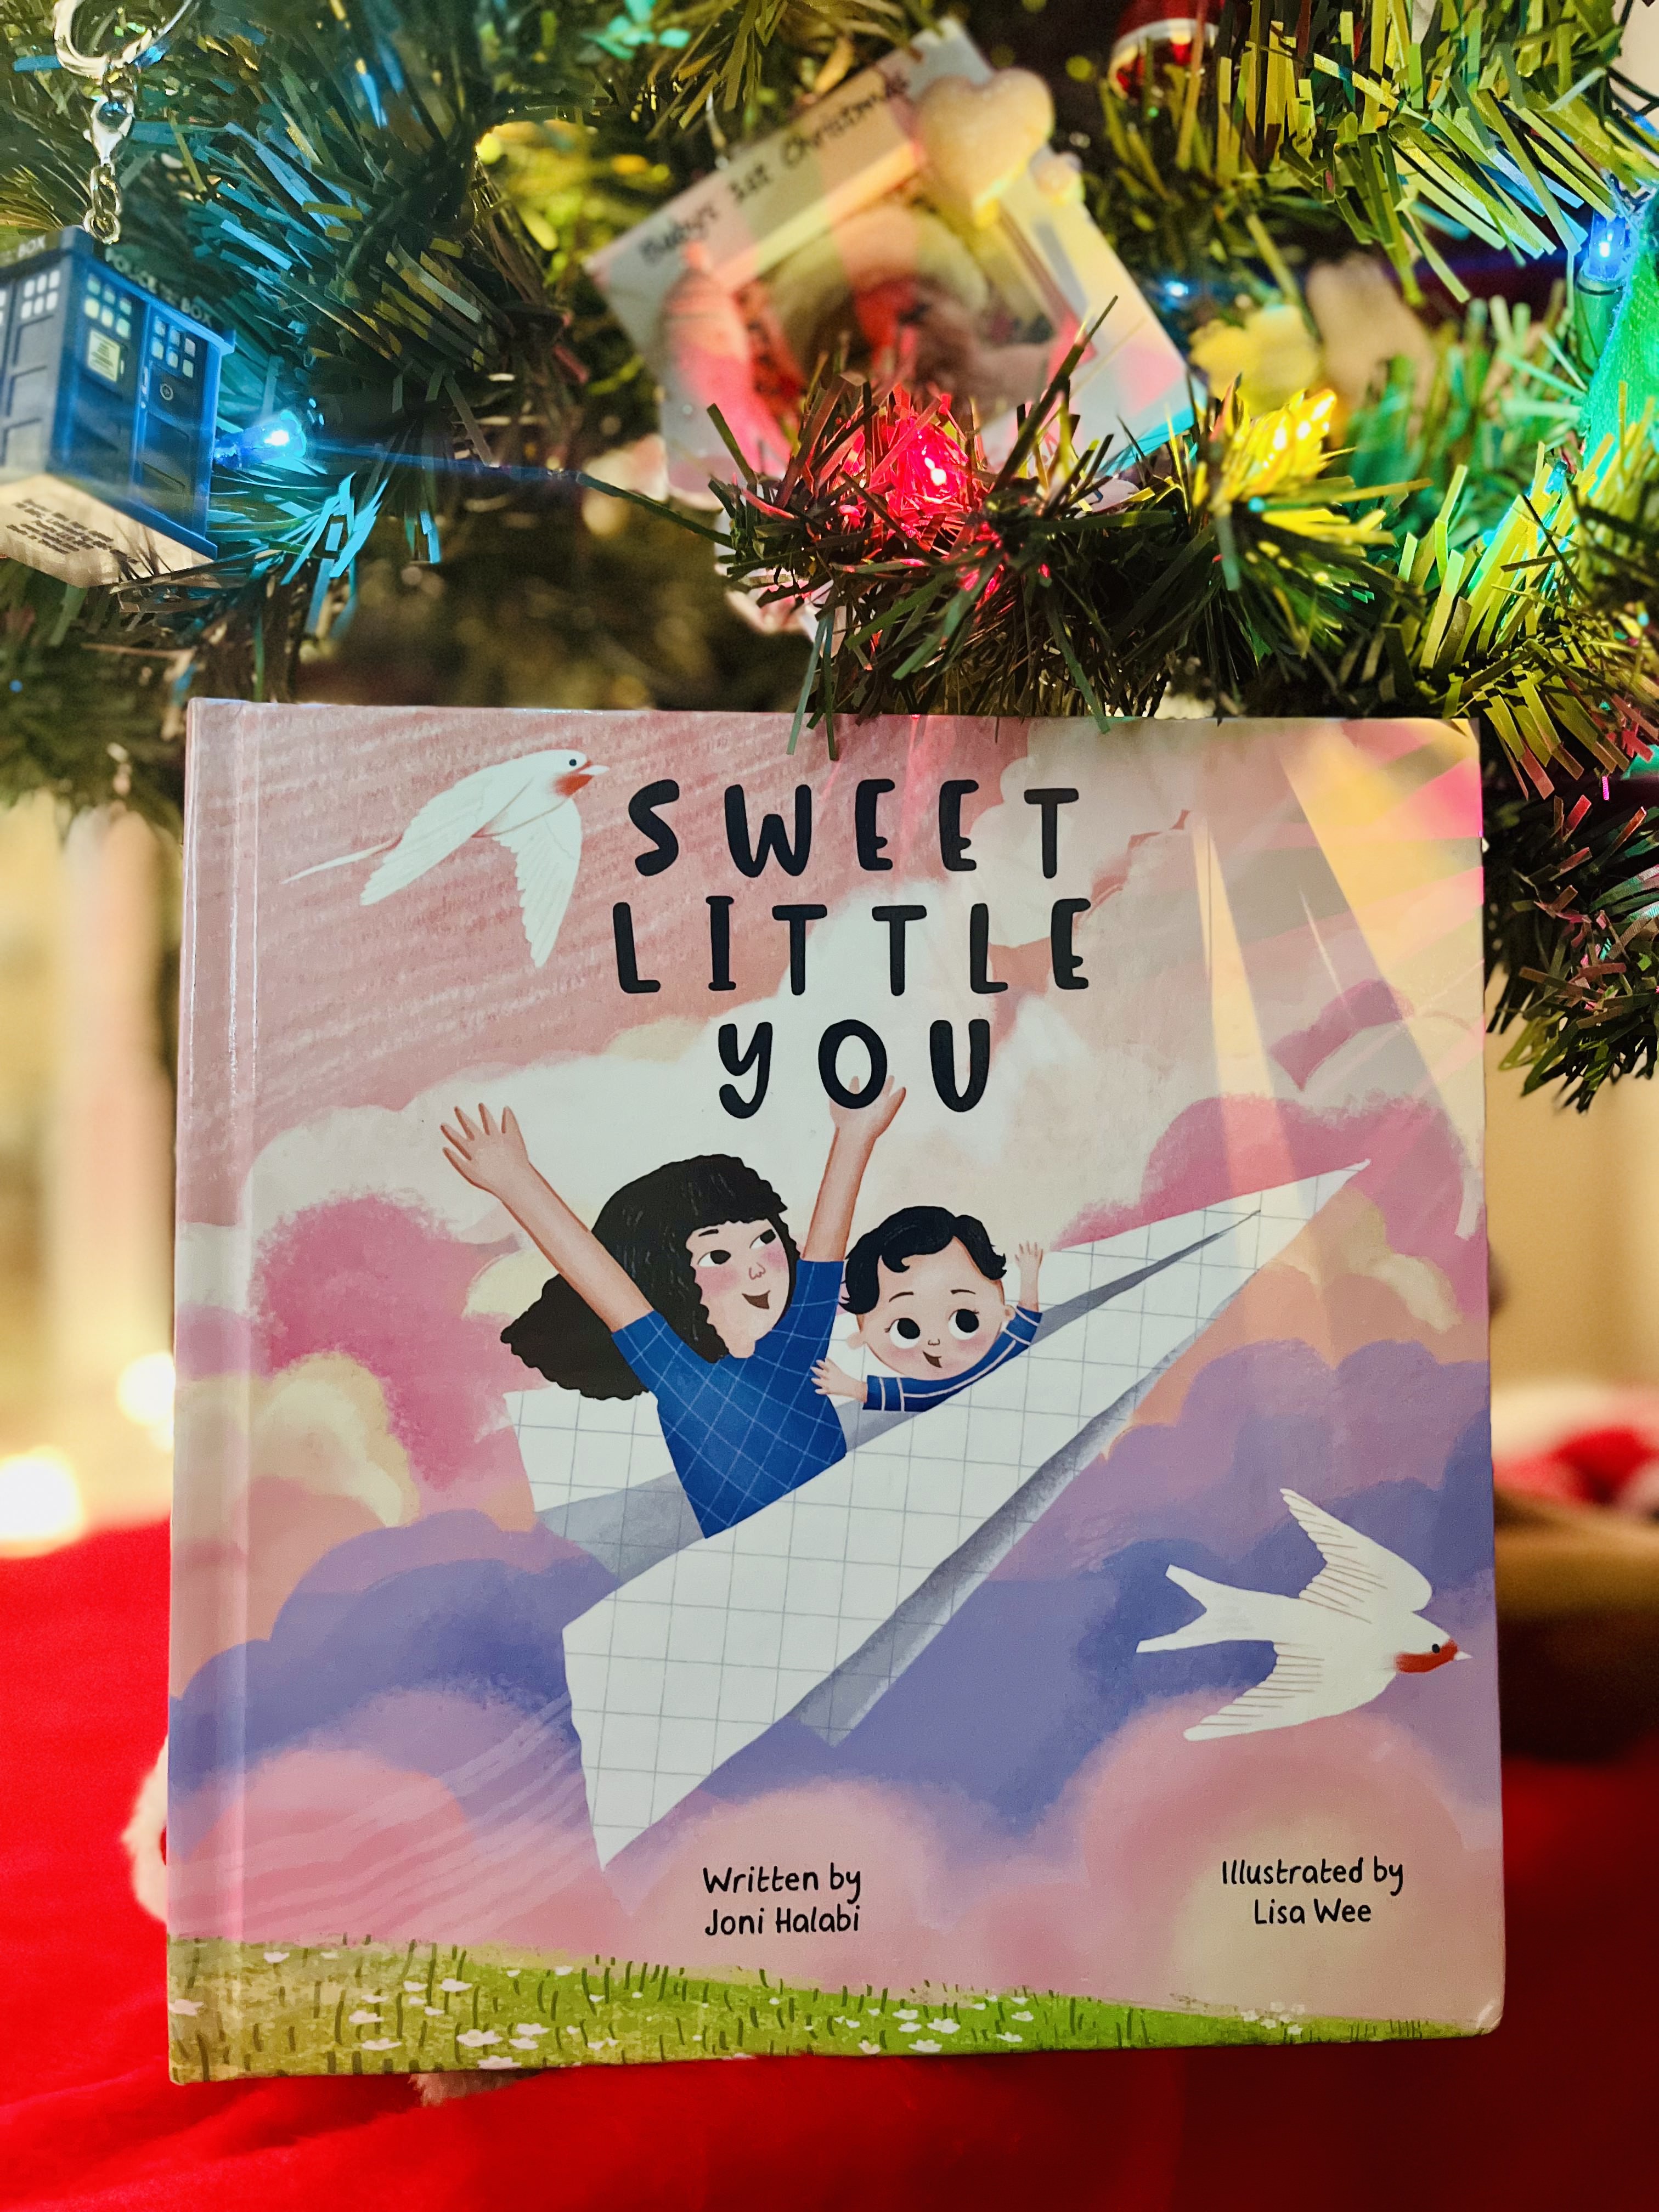 A hardcover copy of Sweet Little You is sitting under a holiday tree. The book cover features a mom and baby flying in a paper airplane